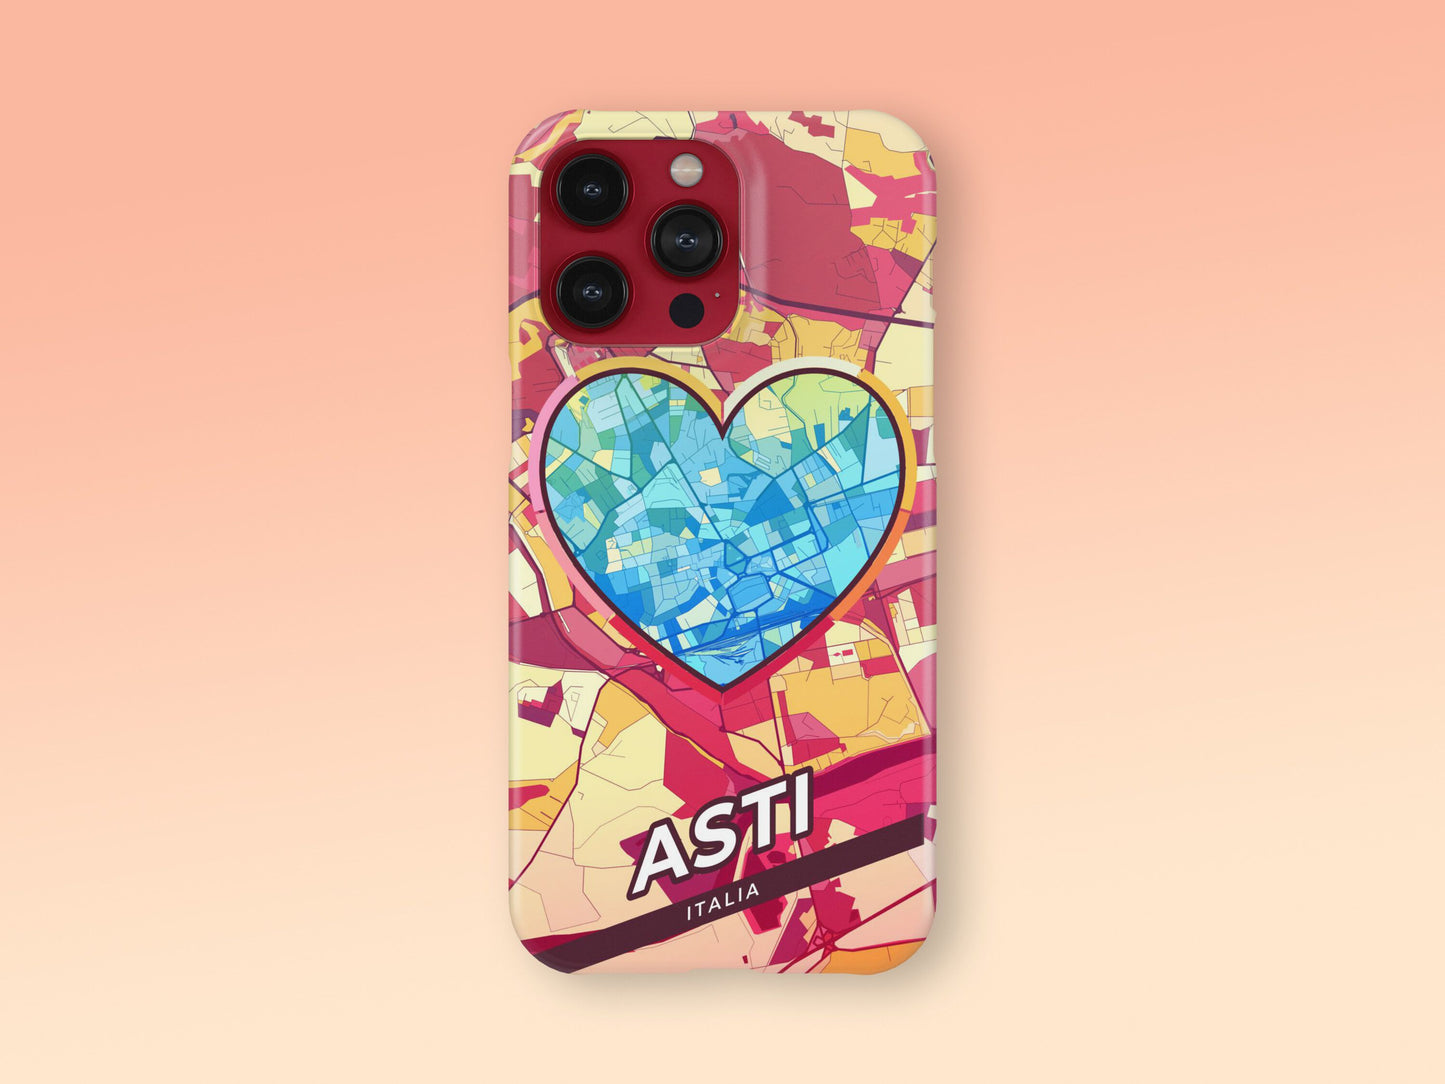 Asti Italy slim phone case with colorful icon. Birthday, wedding or housewarming gift. Couple match cases. 2